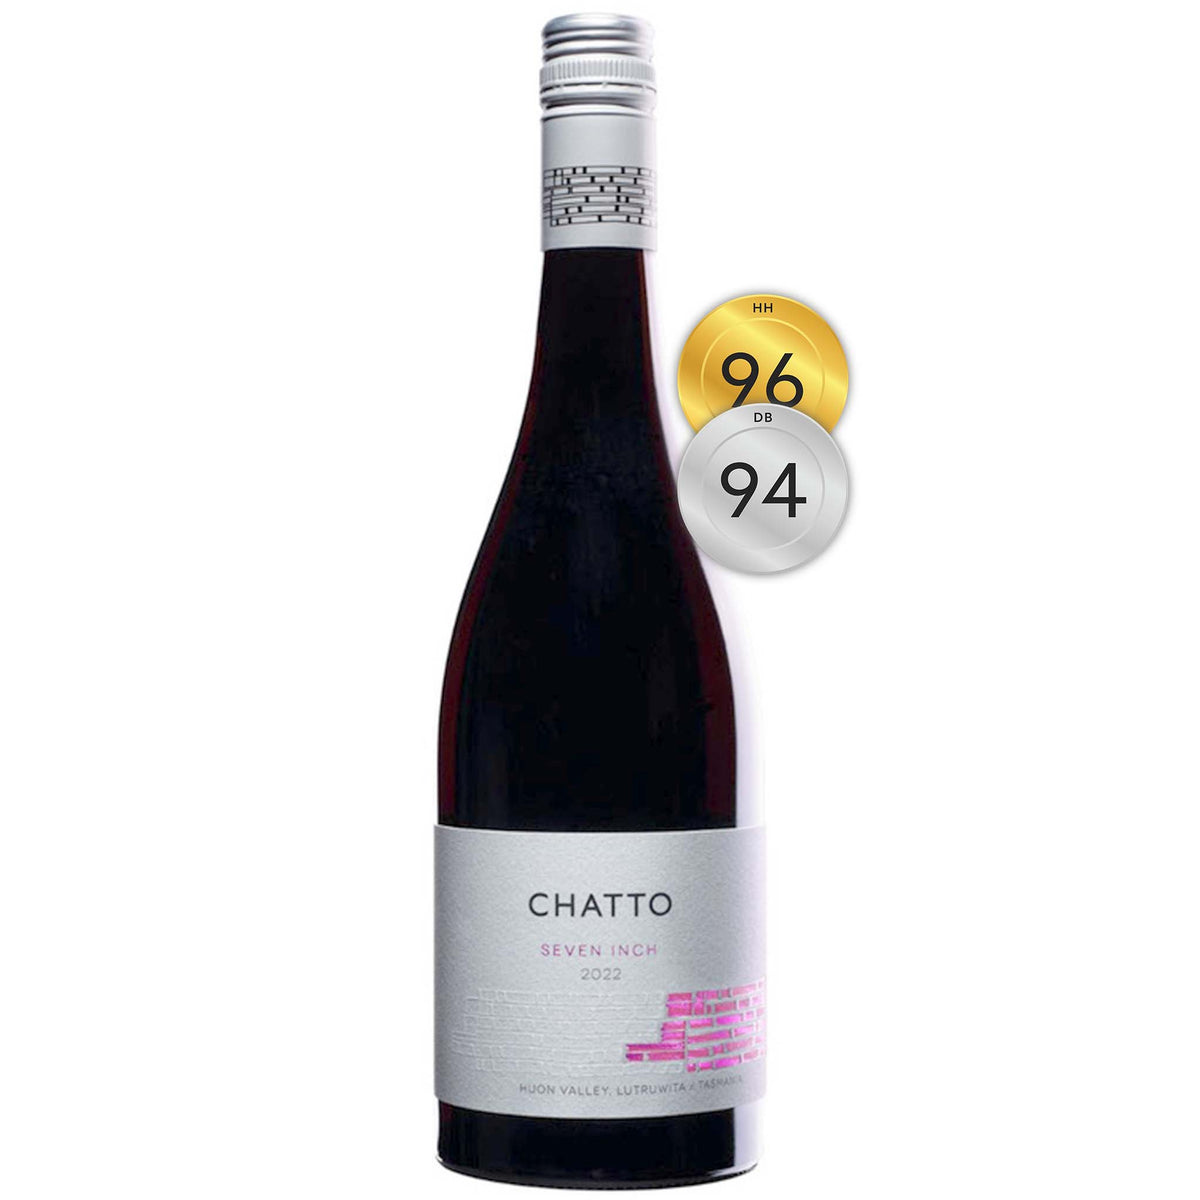 Chatto Seven Inch Pinot Noir 2022